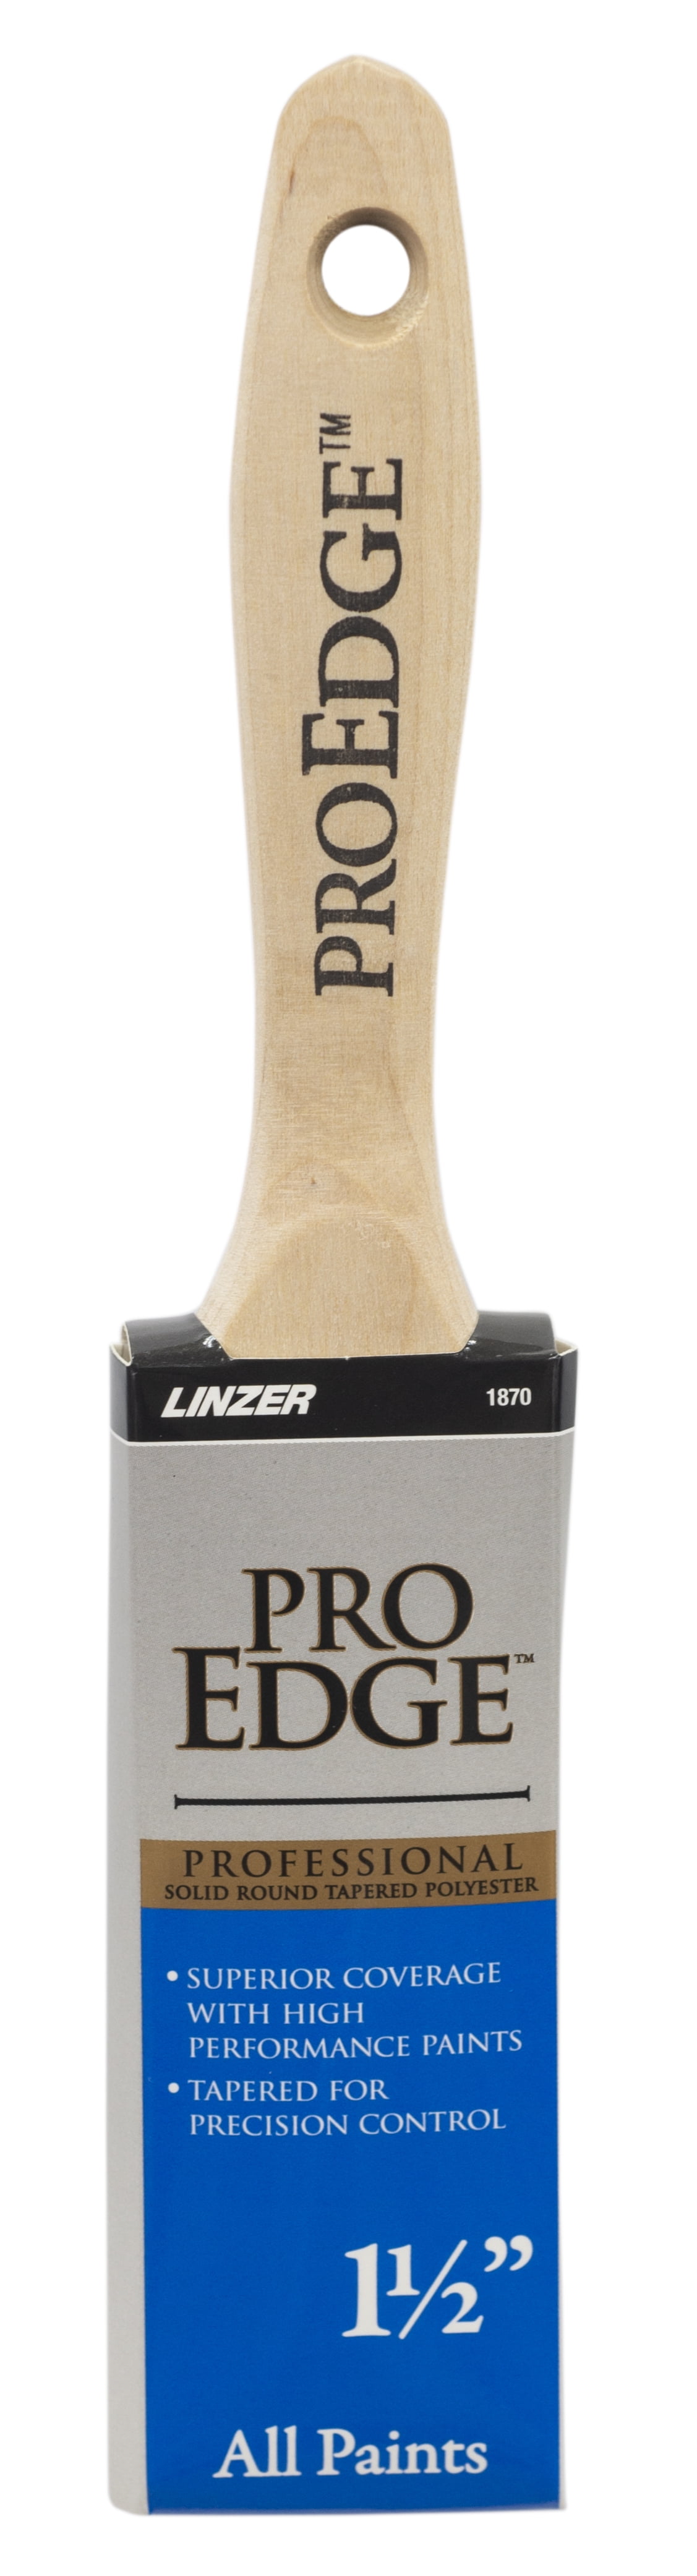 Linzer Pro Impact 2 1/2 in. W Angle Trim Paint Brush - Miller